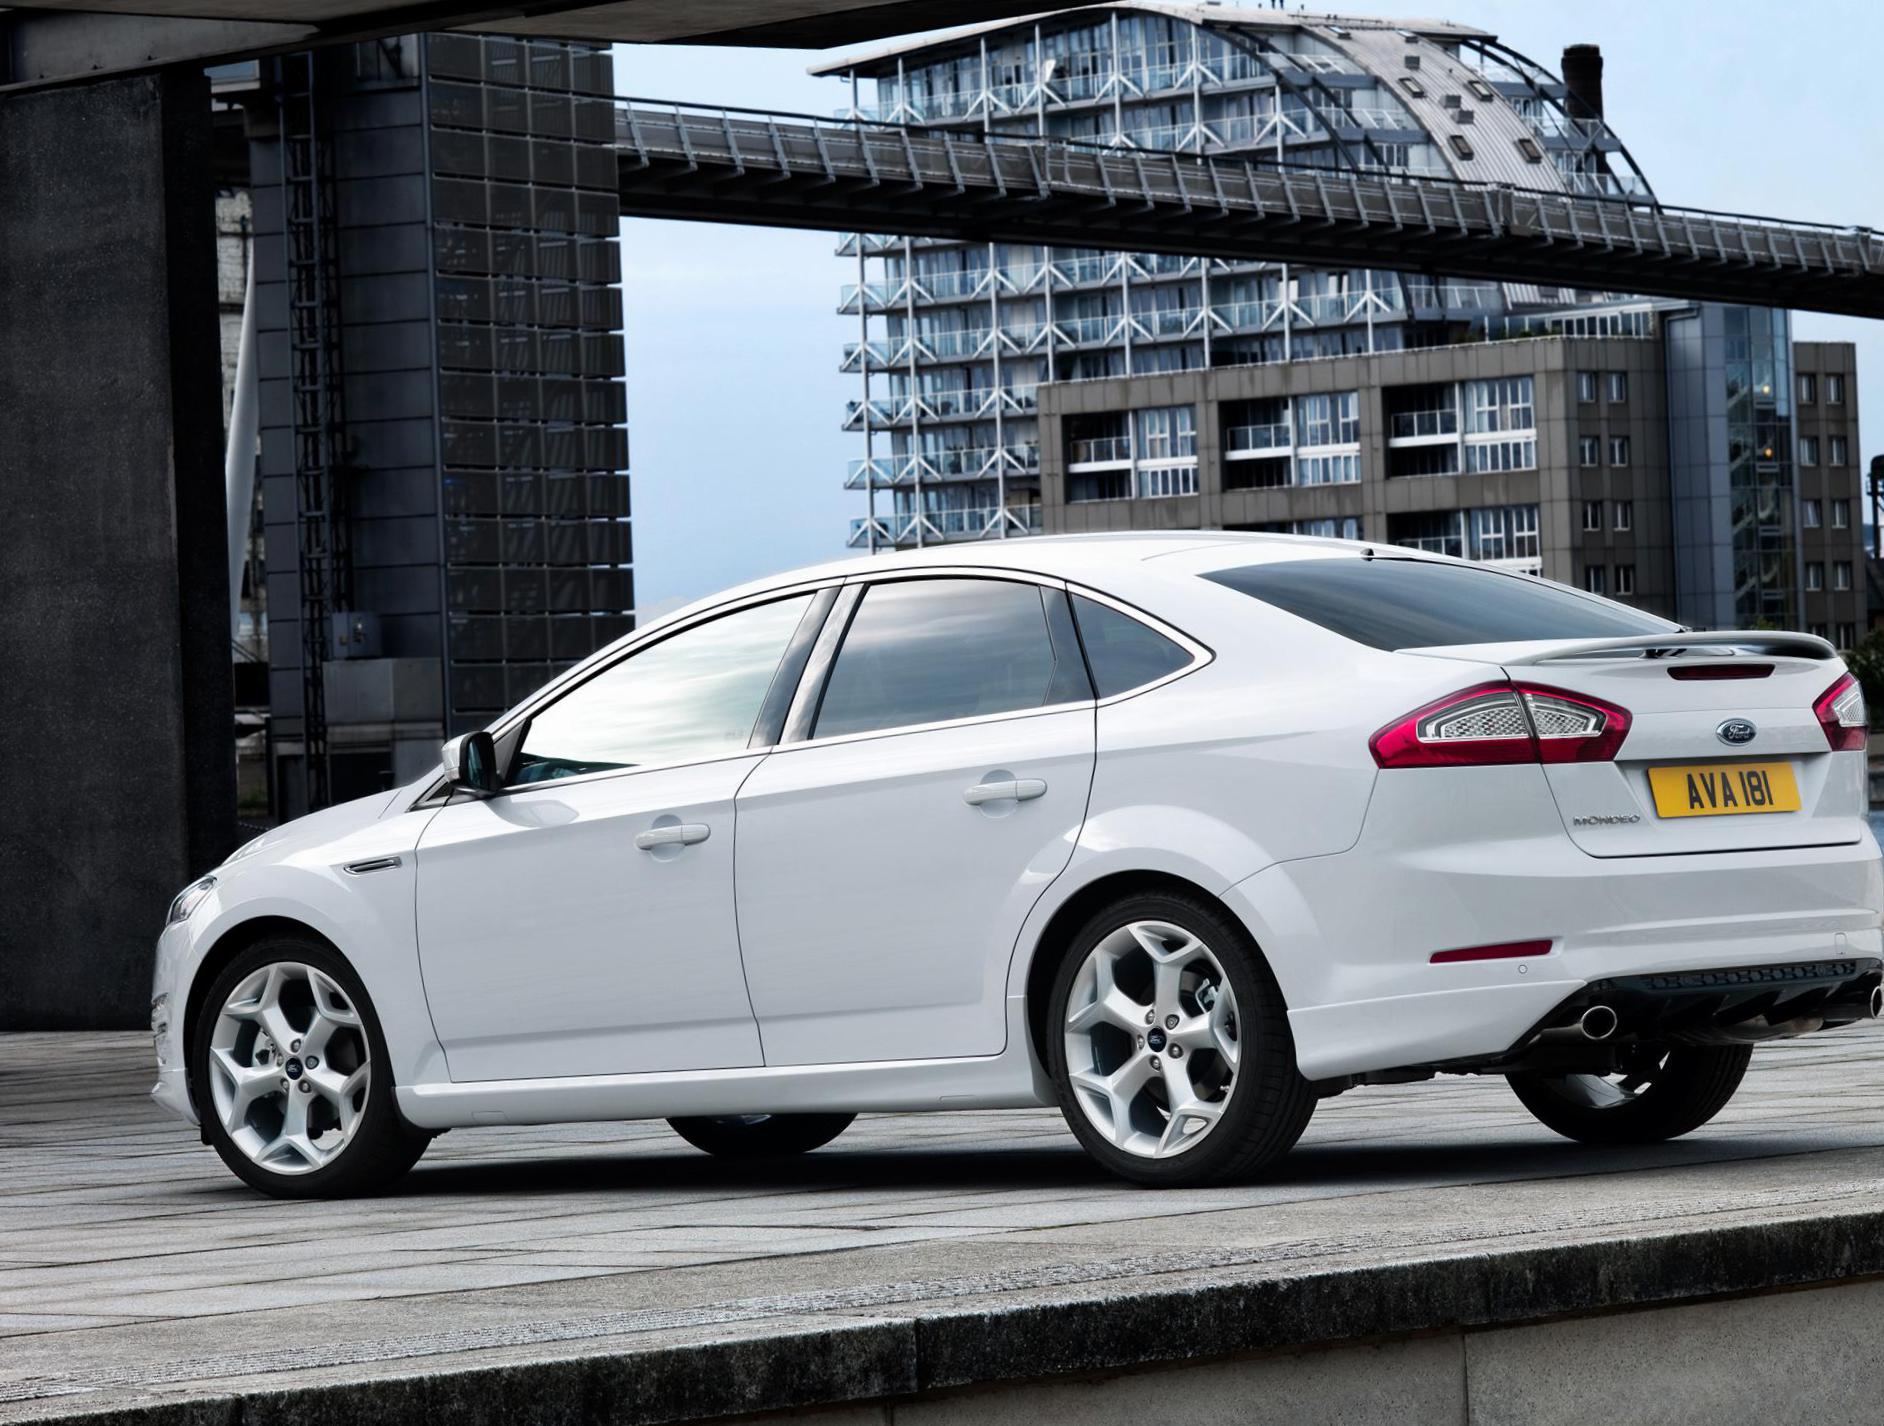 Mondeo Hatchback Ford review 2012